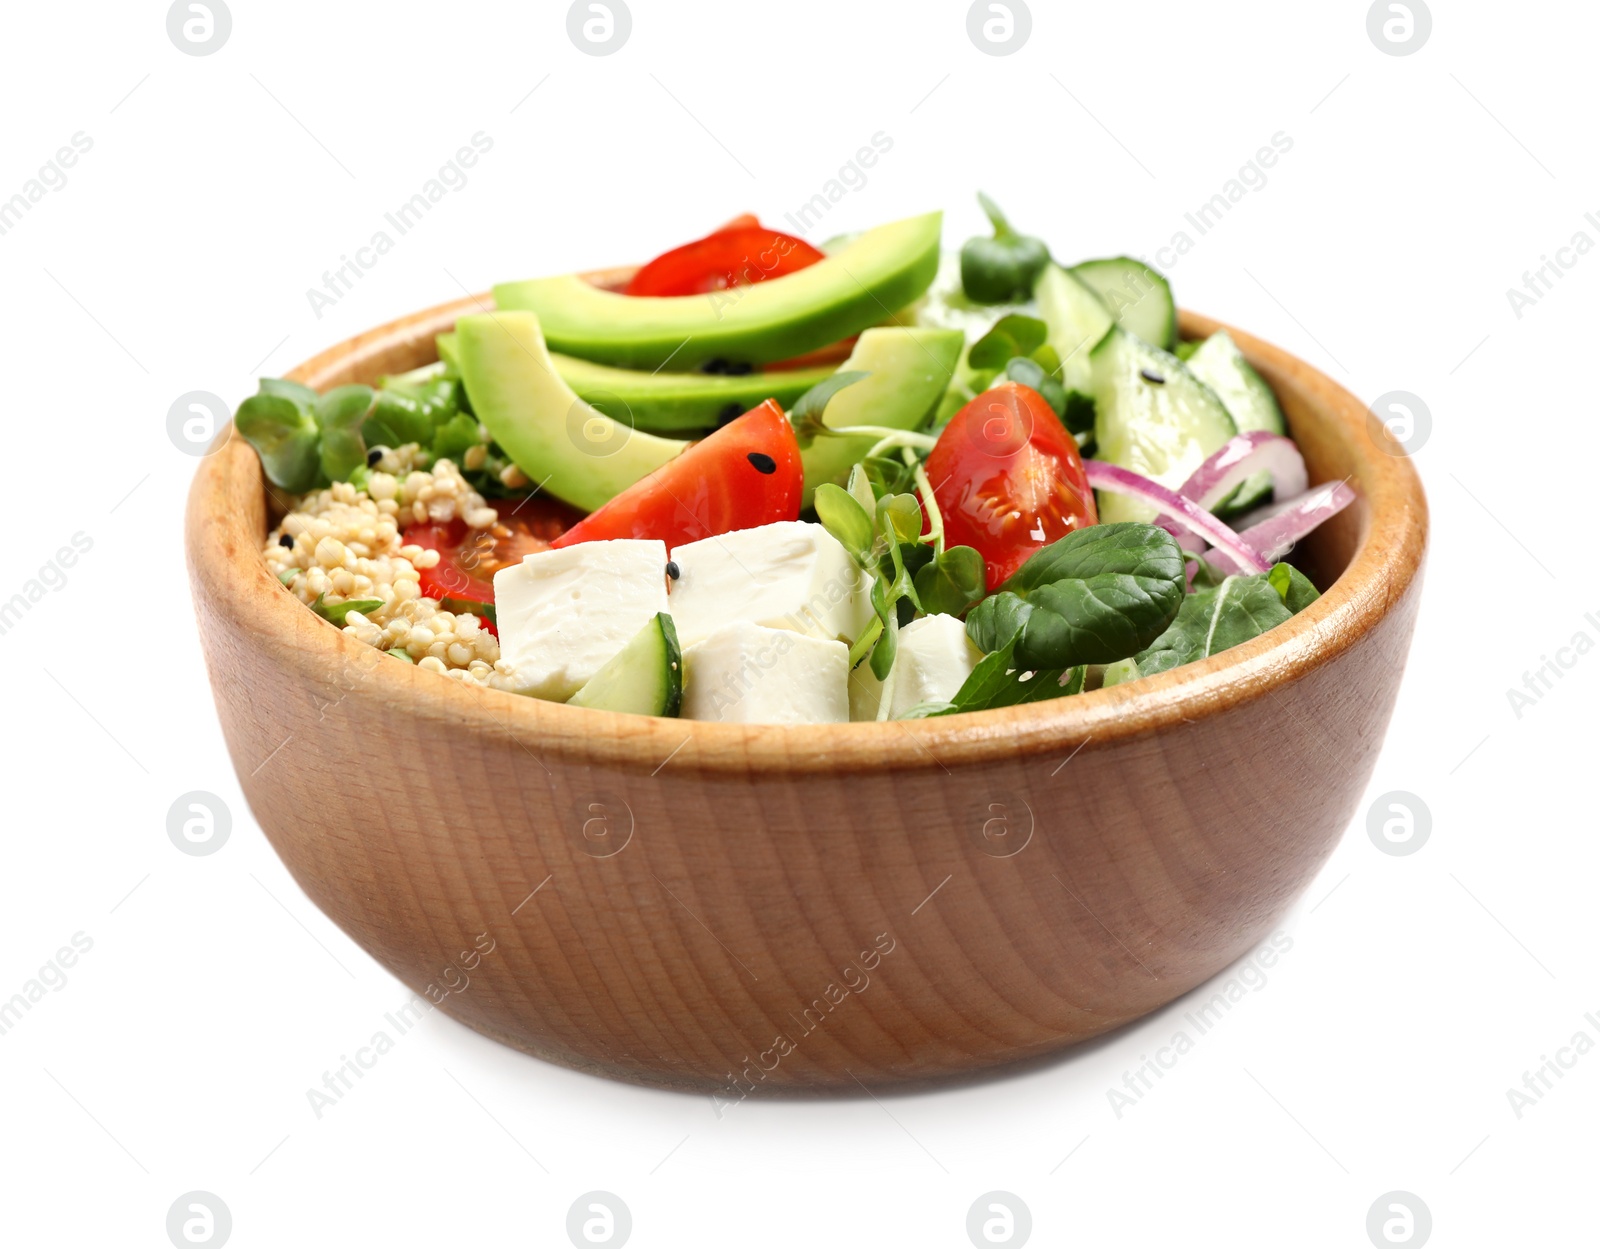 Image of Delicious salad with avocado and quinoa in bowl on white background 